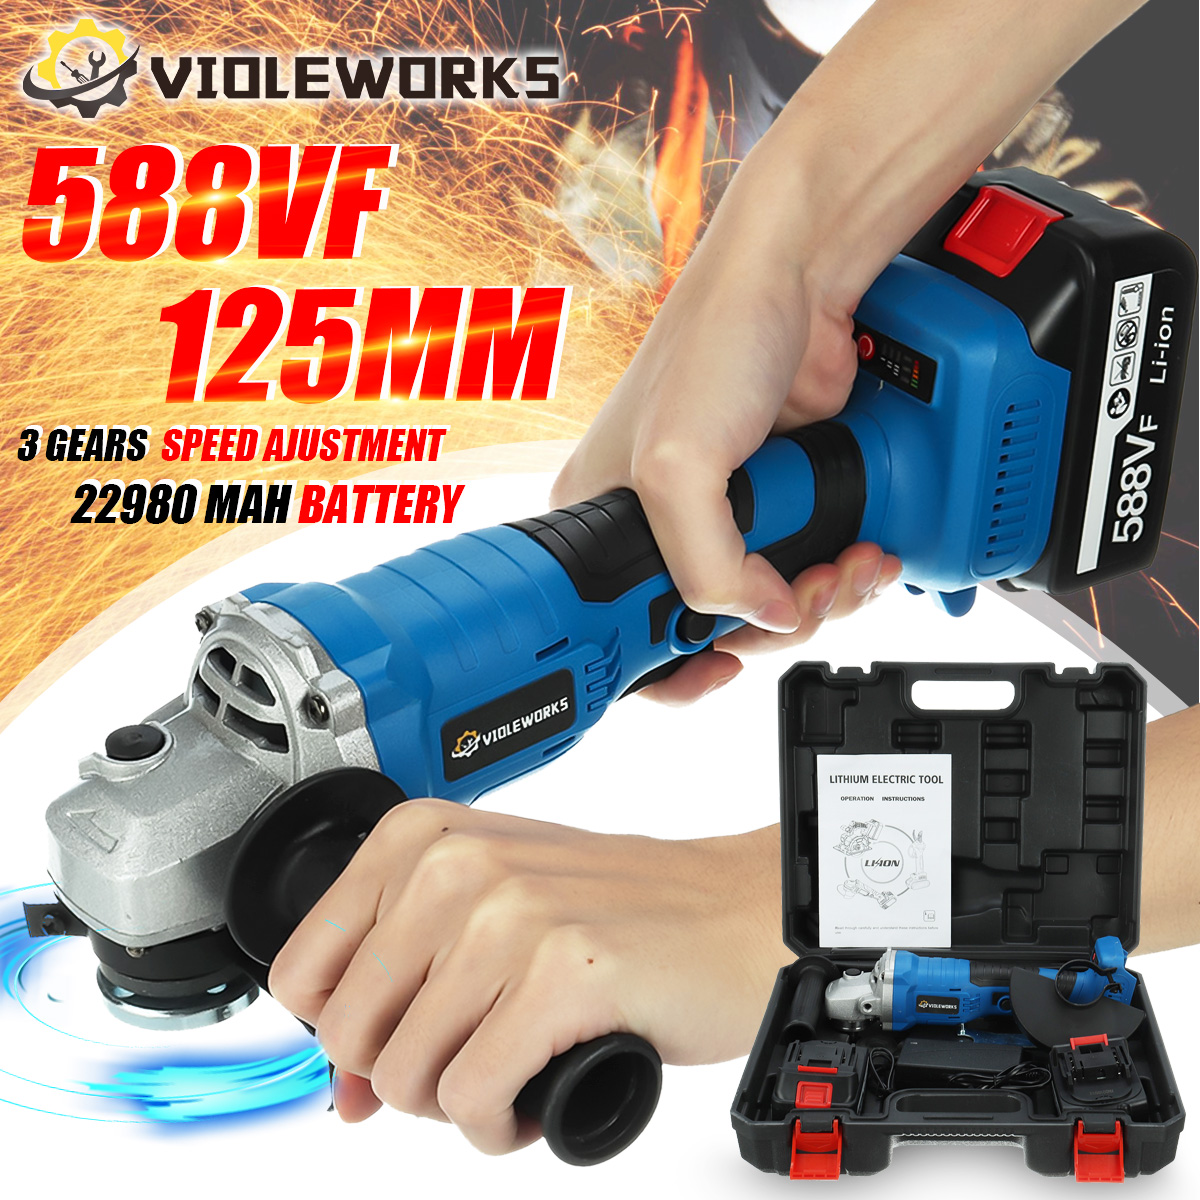 VIOLEWORKS-588VF-125mm-Cordless-Angle-Grinder-Cordless-Electric-Grinding-Cutting-Polishing-Tool-W-12-1847101-1